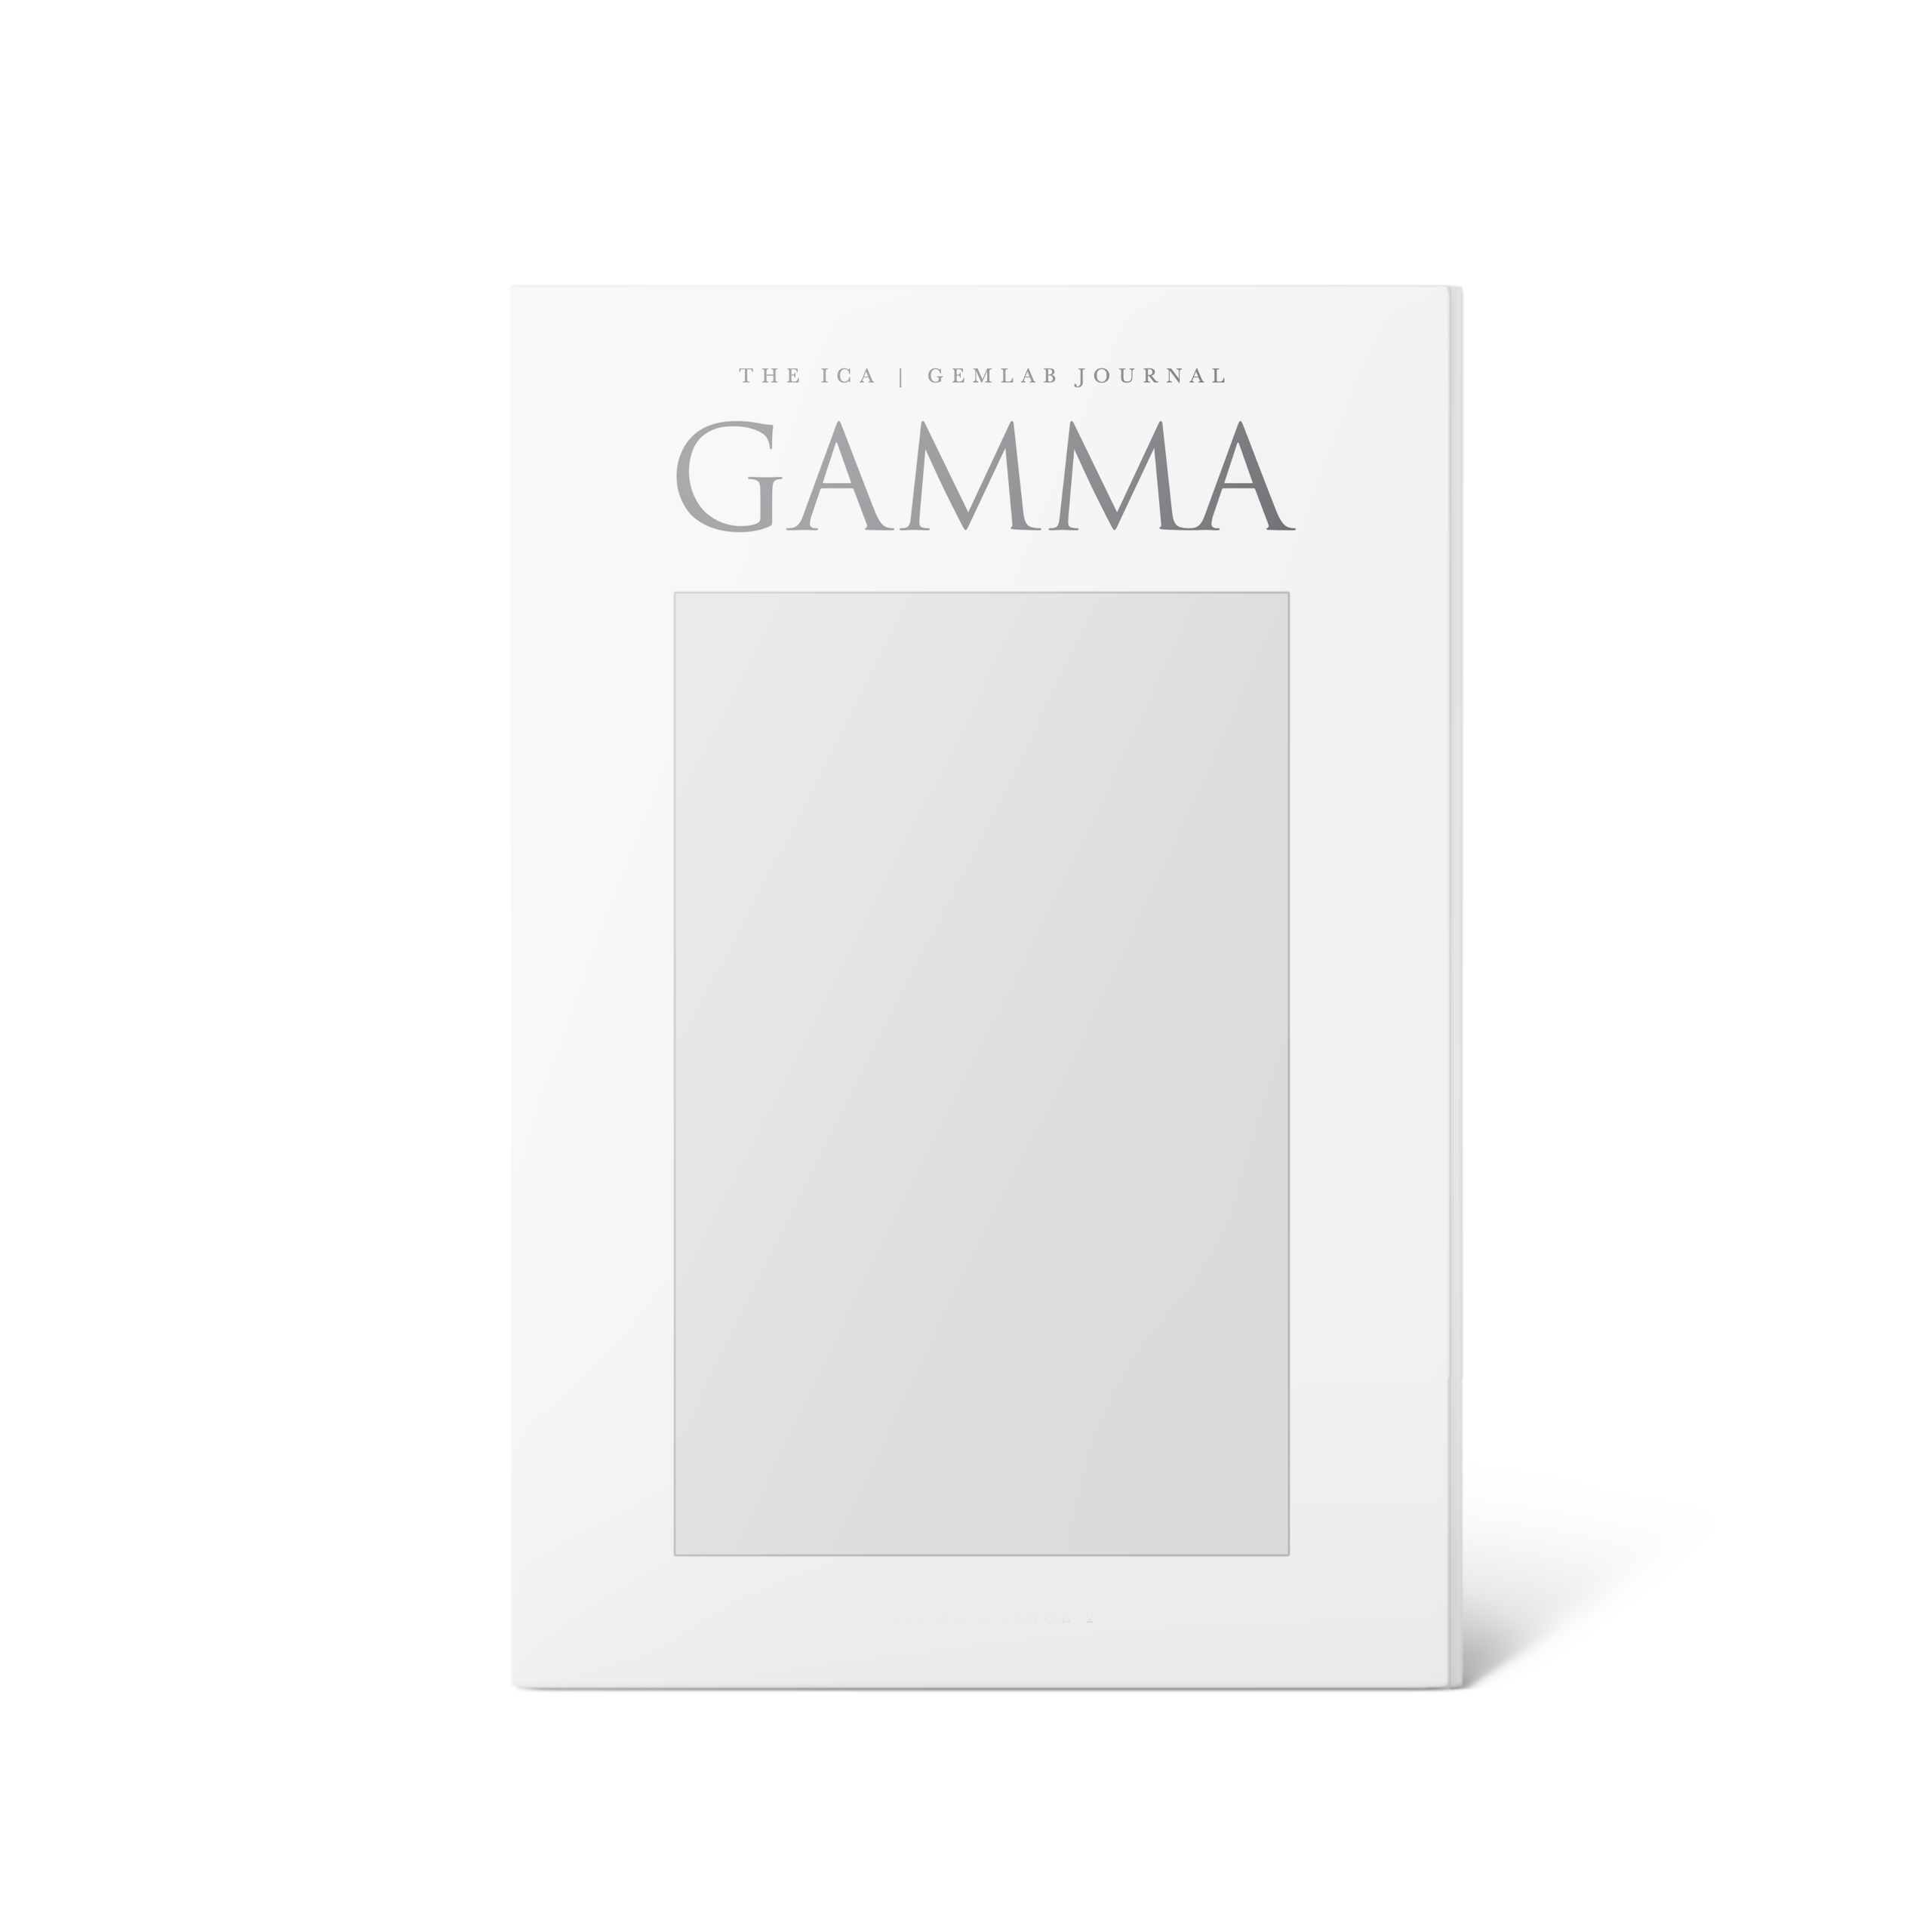 Gamma the ICA GemLab Gemmological journal. Holding image for upcoming issues